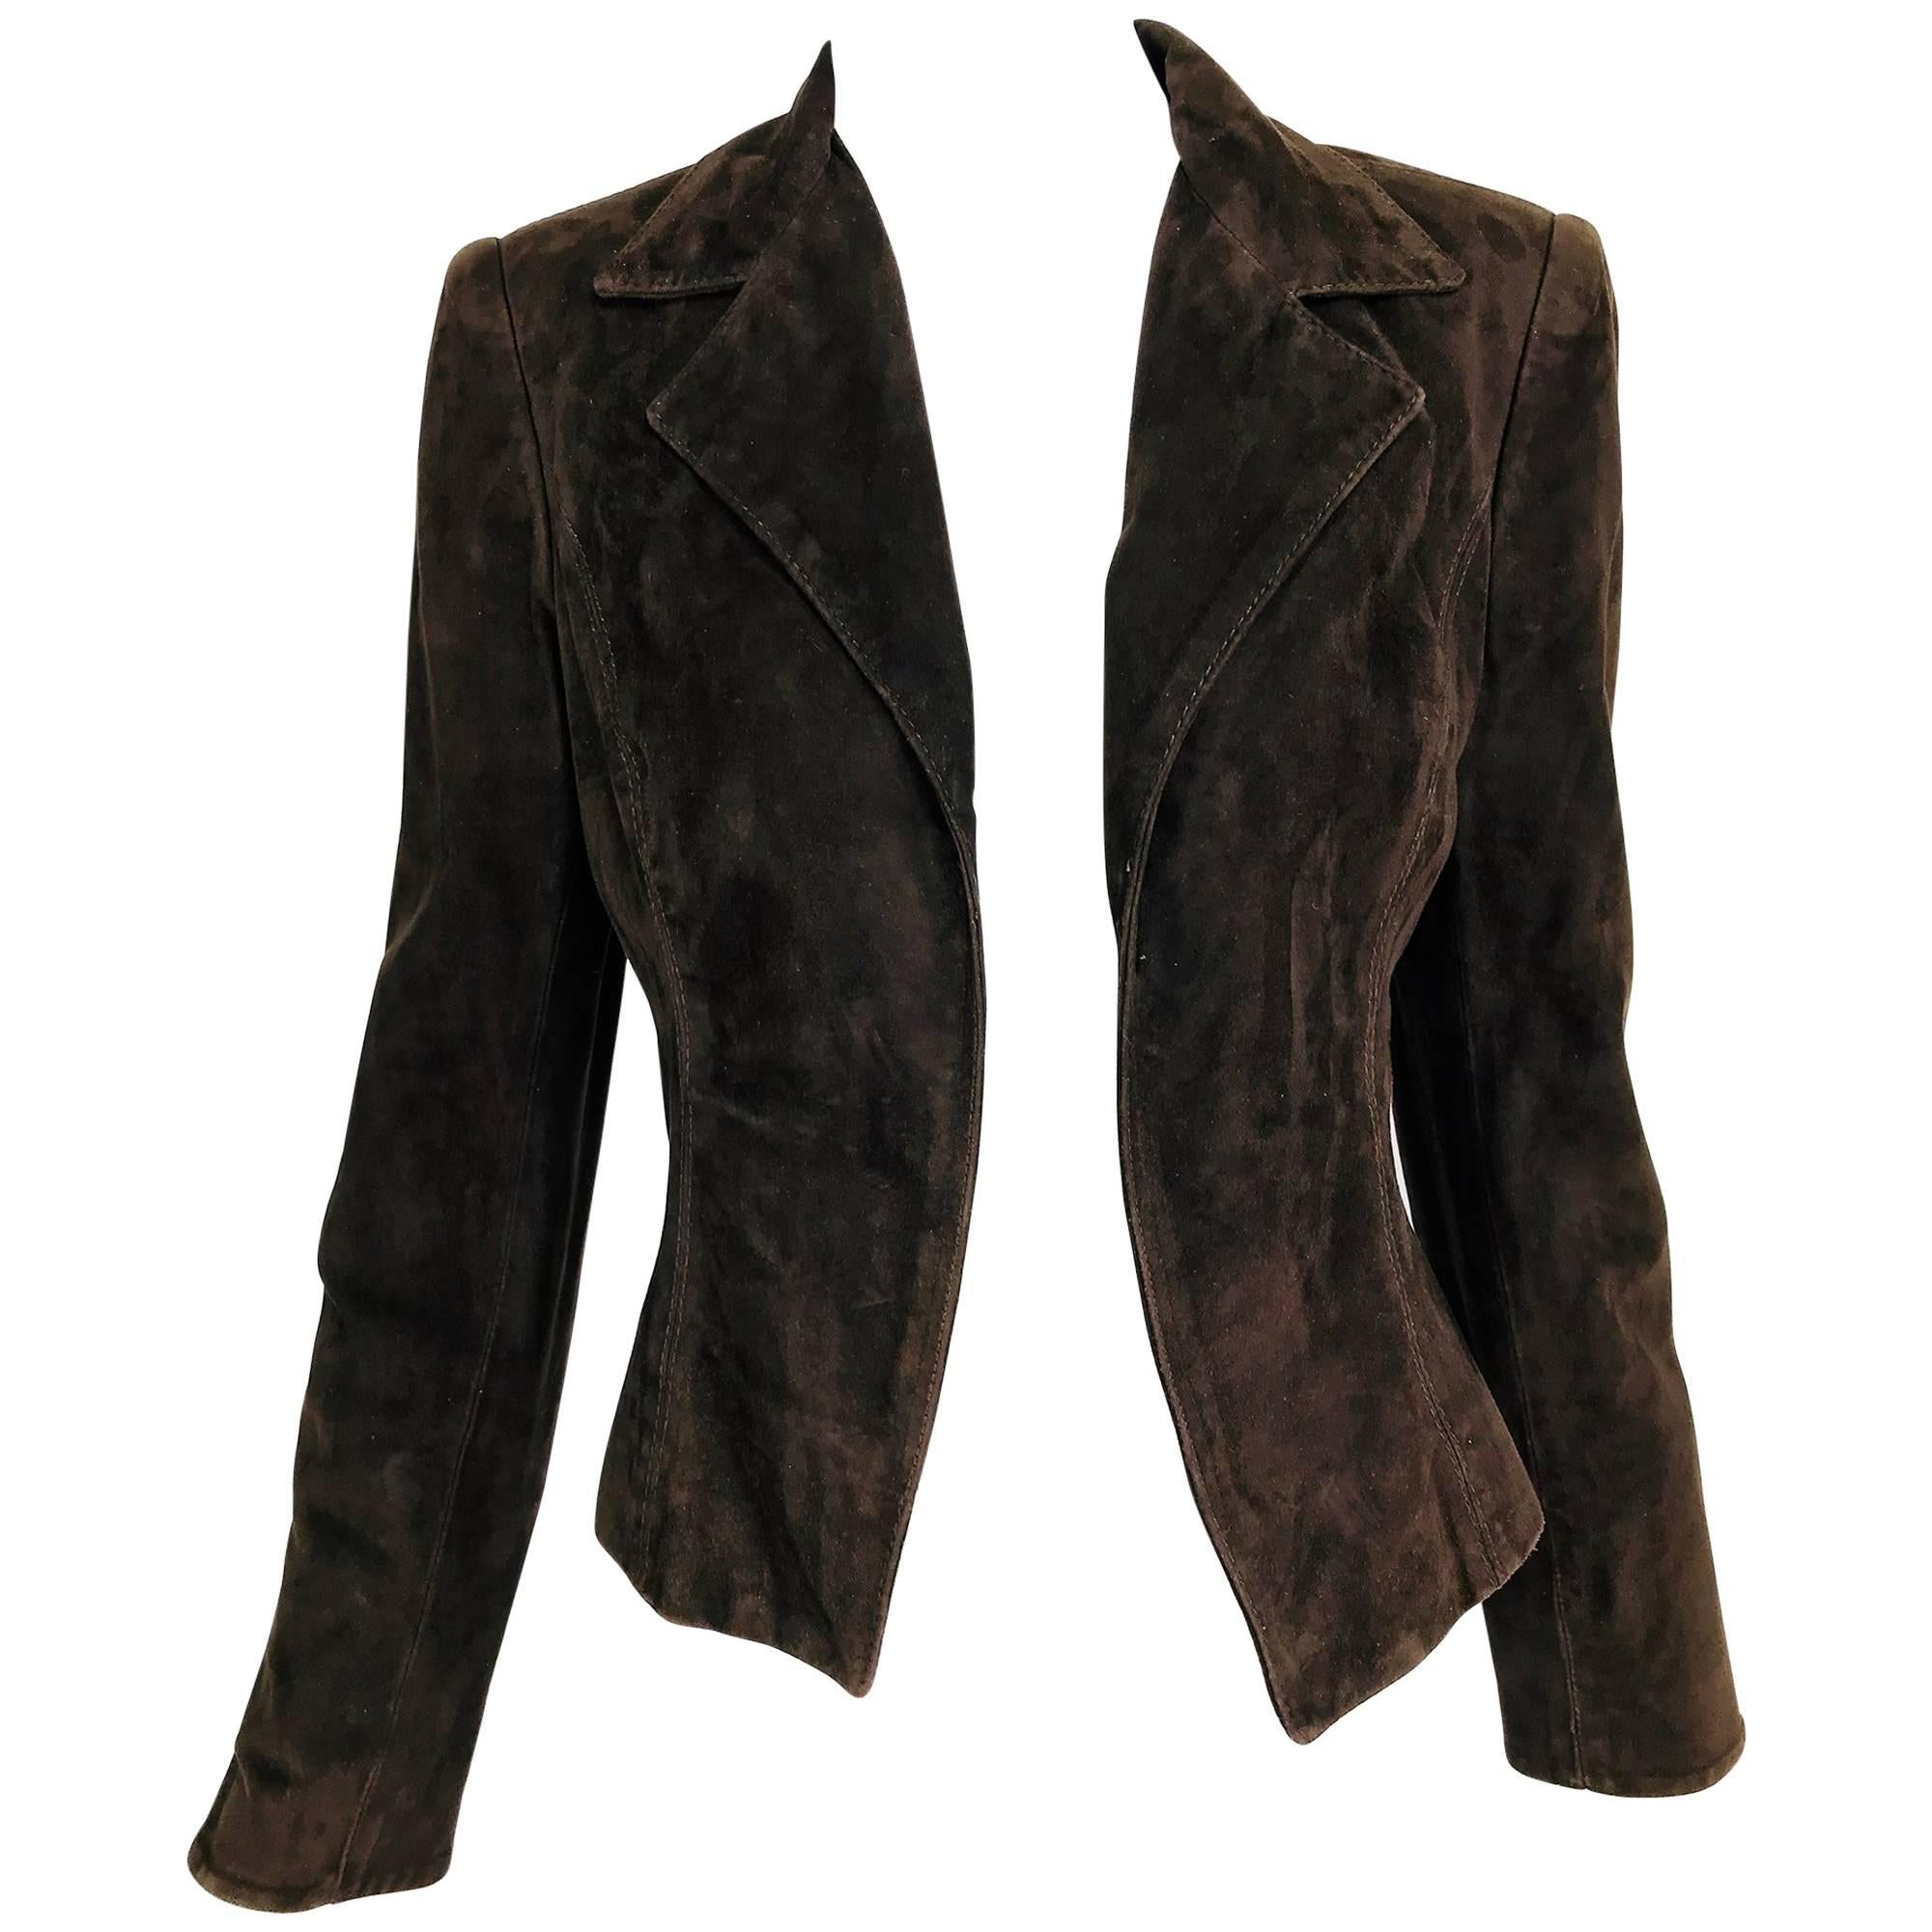 Valentino Chocolate brown top stitched suede jacket